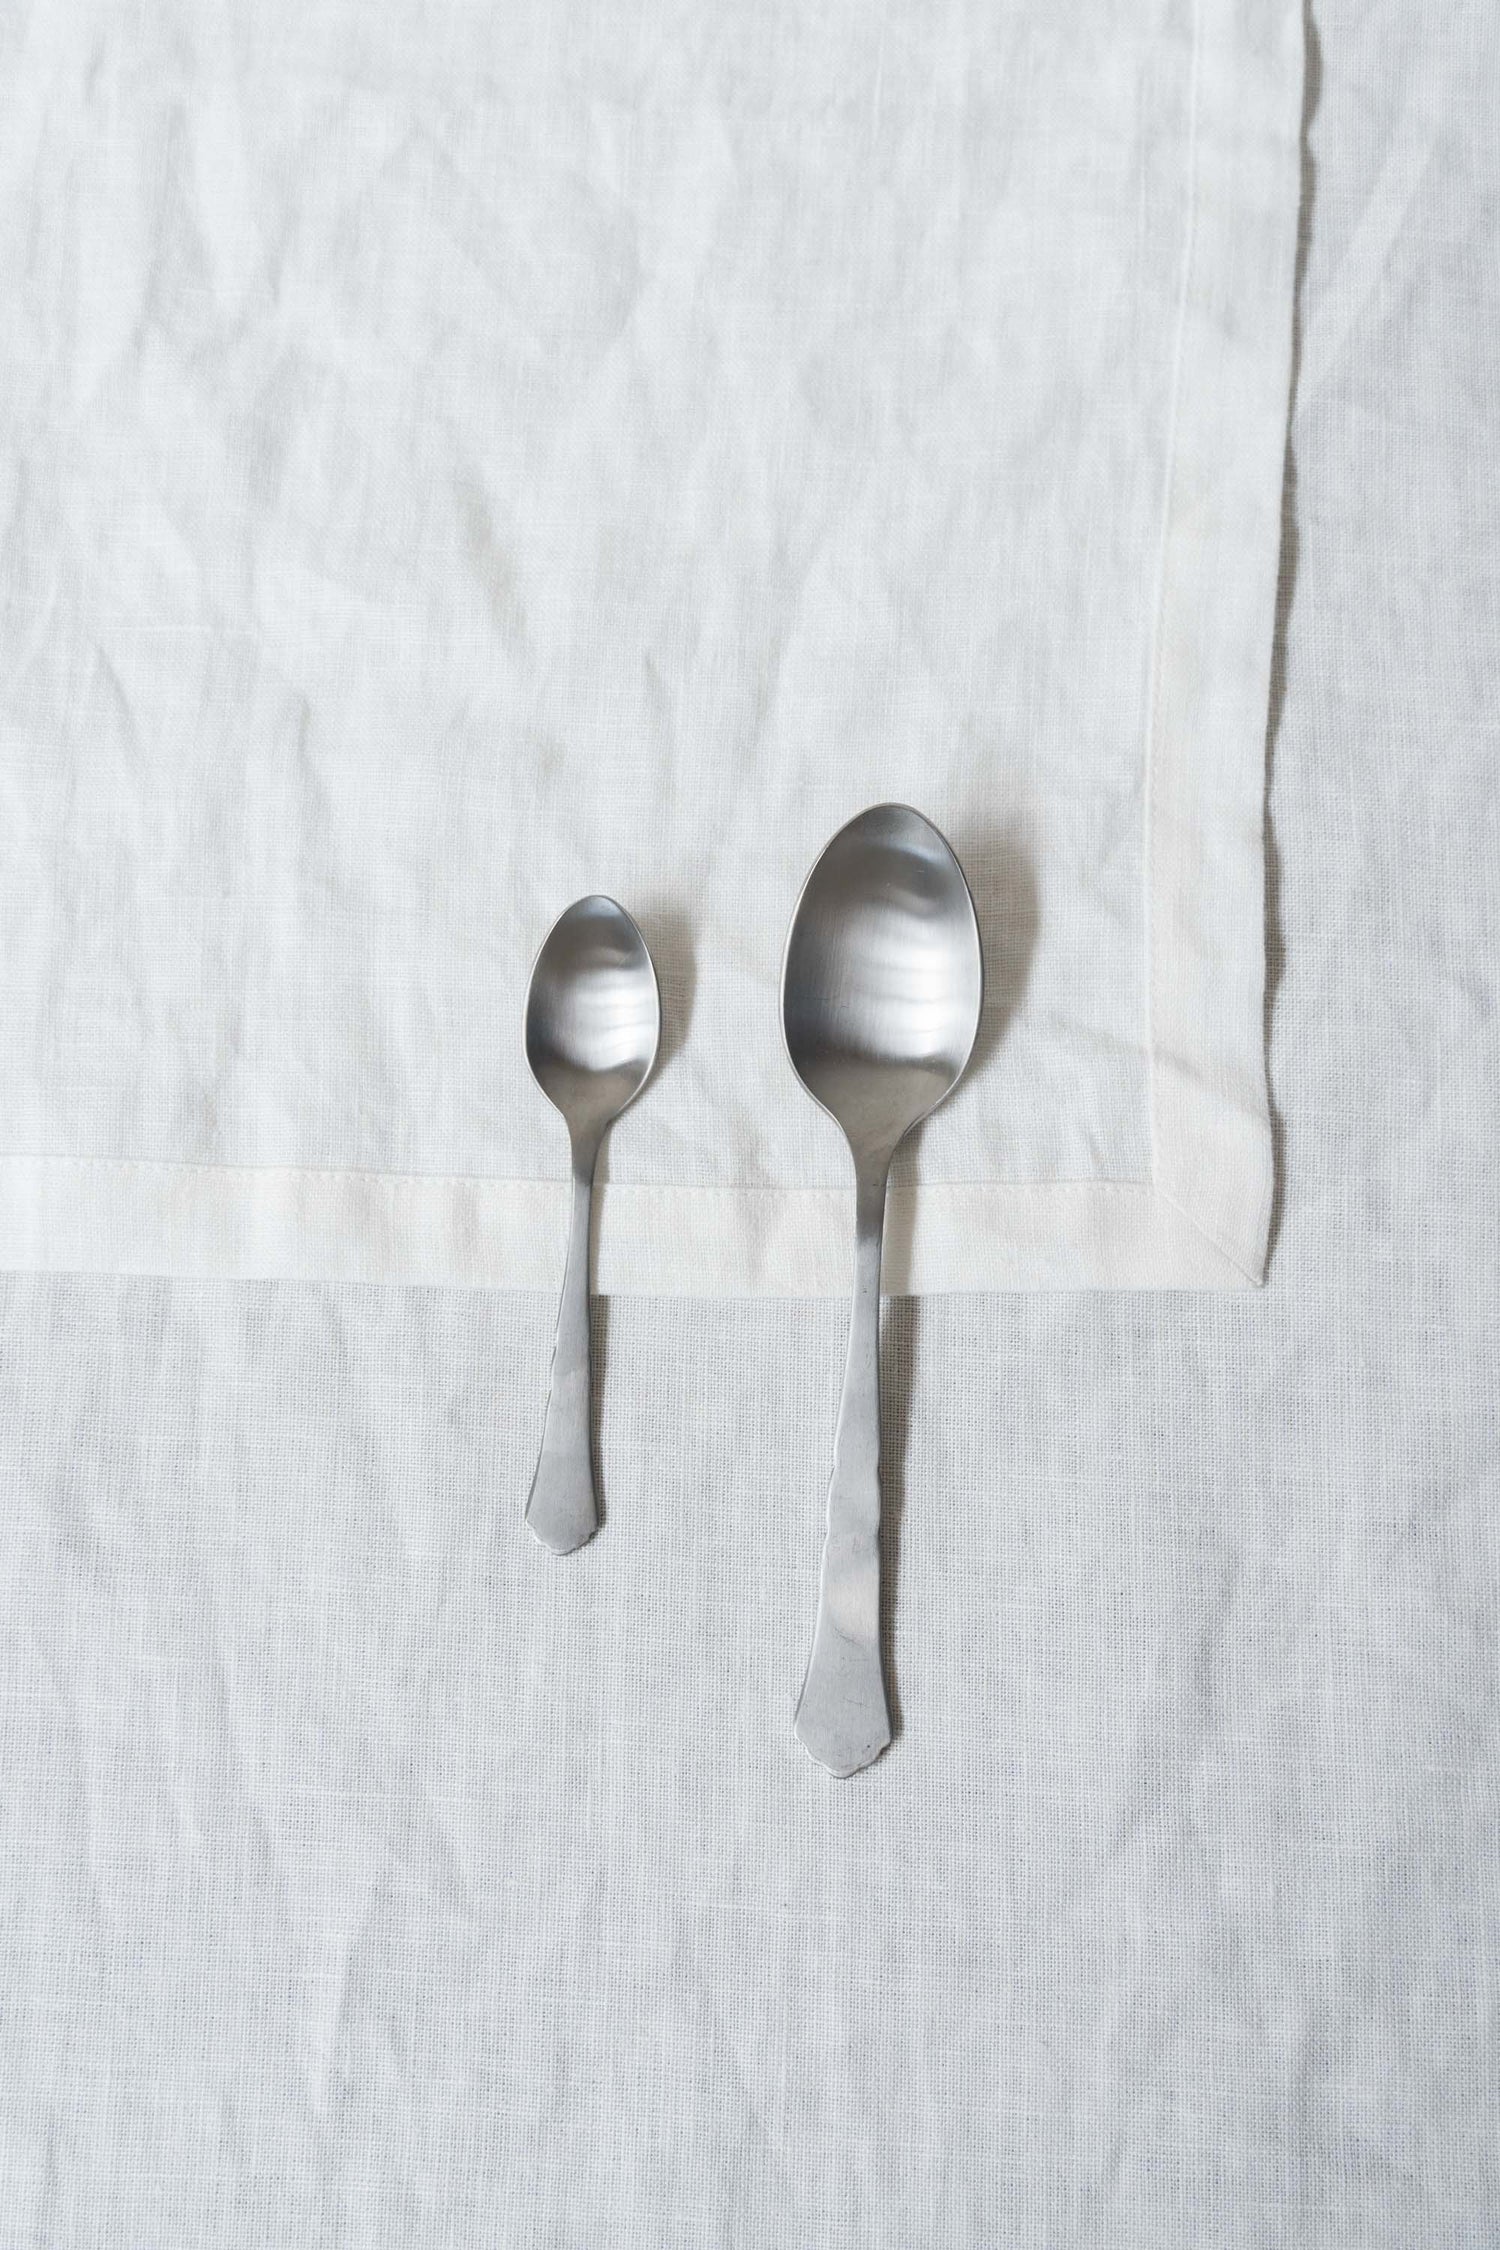 '700 Fruit Spoon - part of the '700 edition KnIndustrie Cutlery collection. Perfect for starters or dessert.